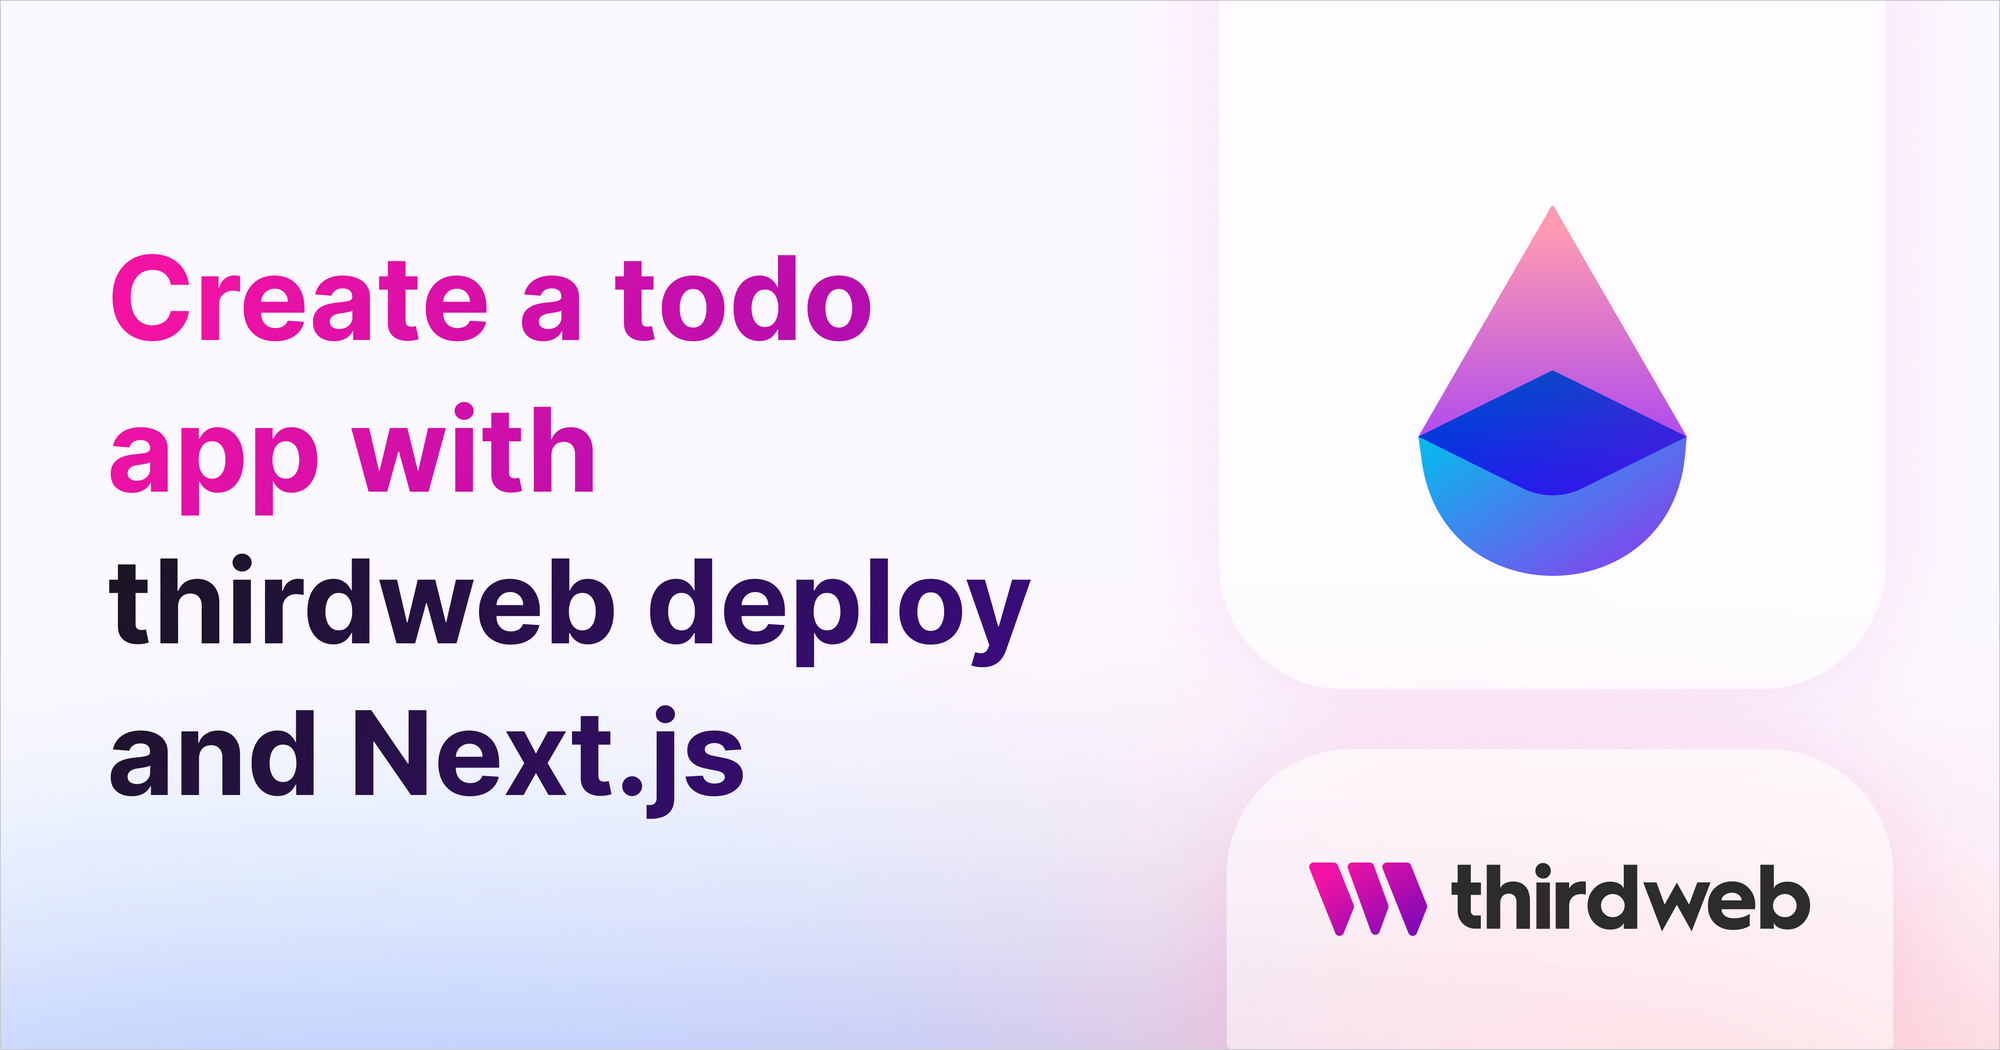 Create a todo app with thirdweb deploy and Next.js